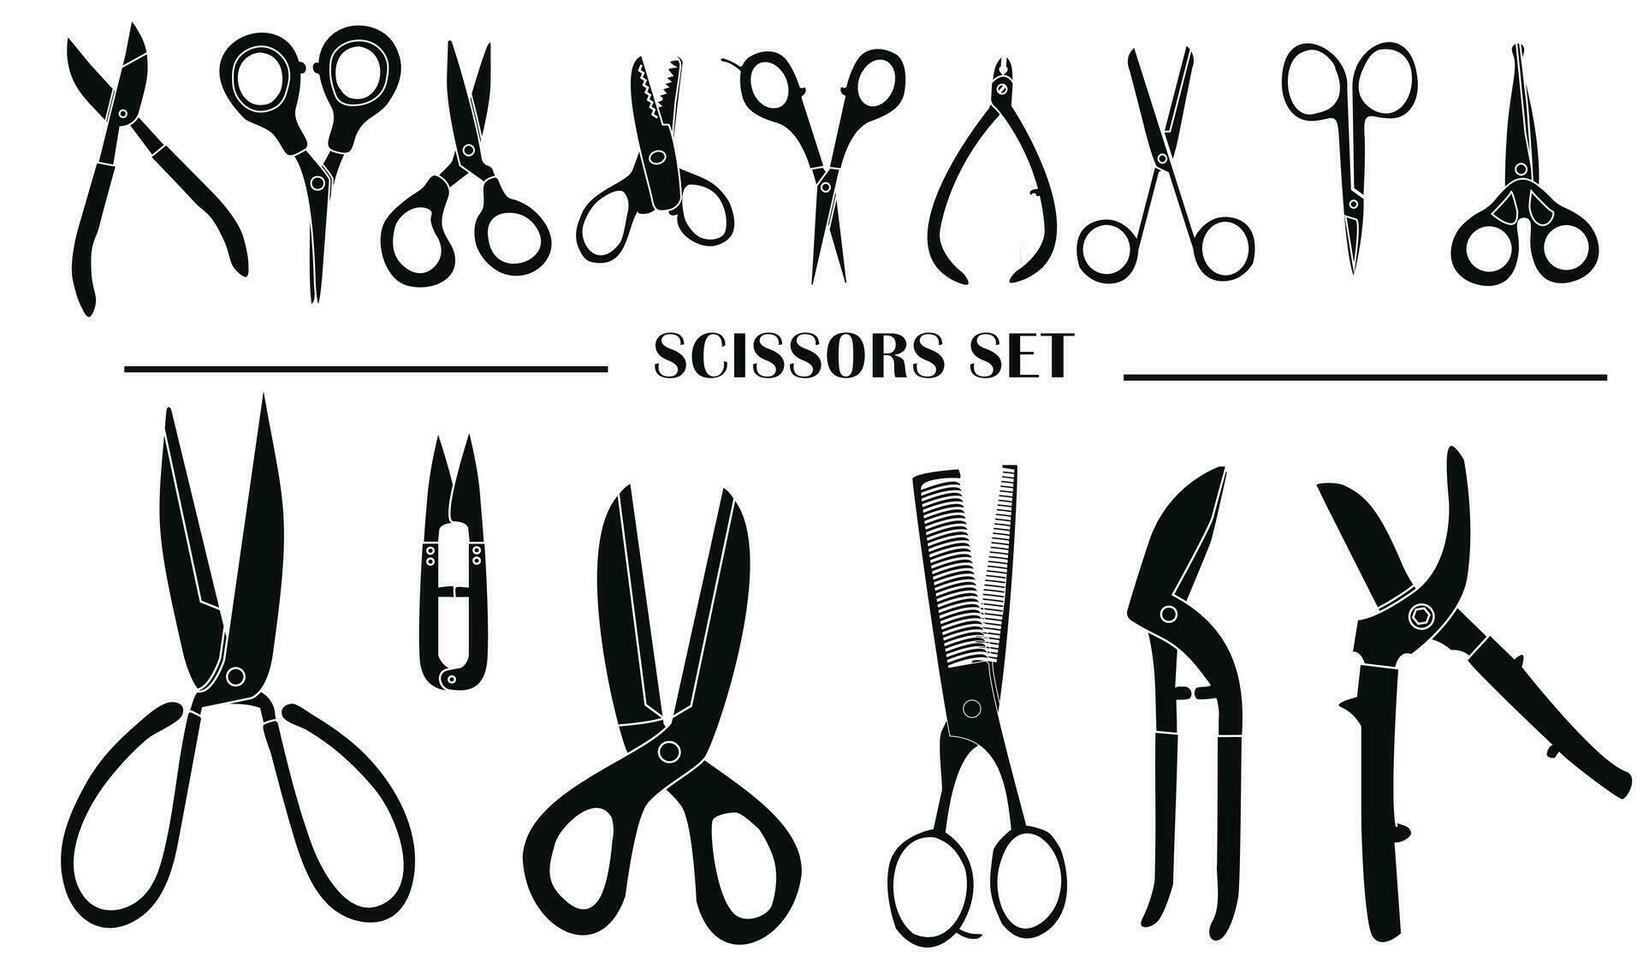 Different scissors types vector illustration in silhouette style